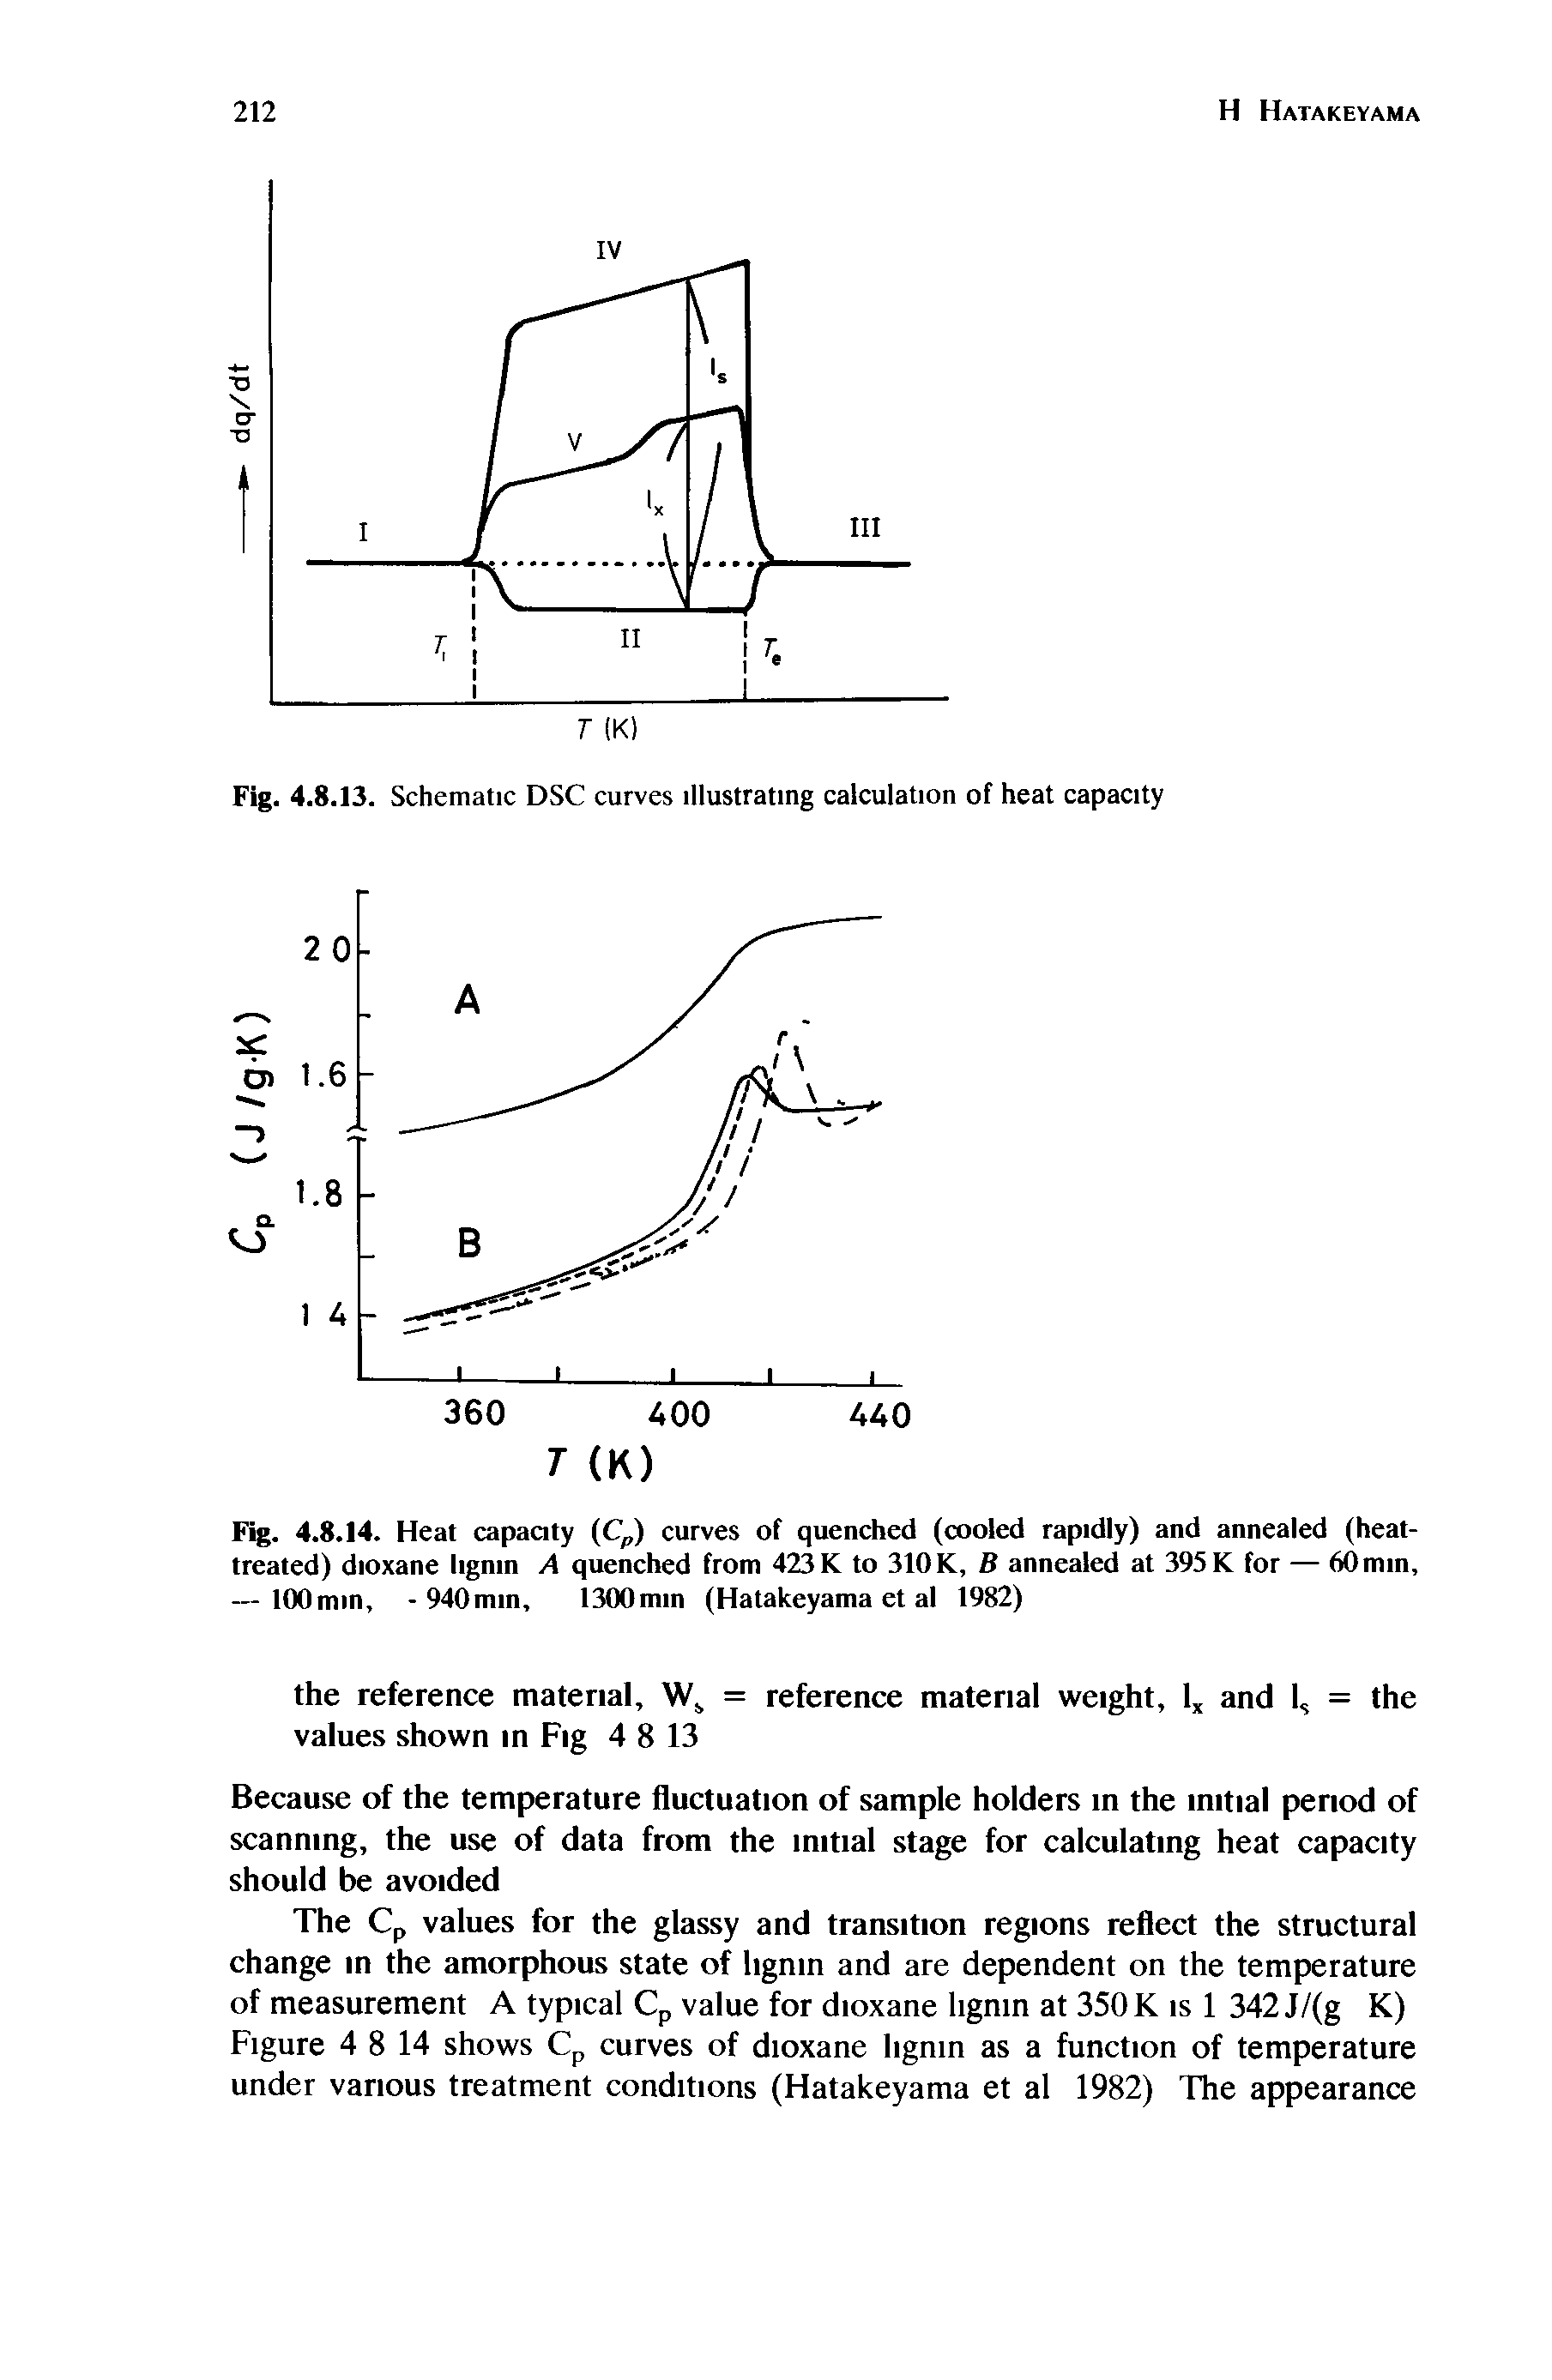 Fig. 4.8.14. Heat capacity (Cp) curves of quenched (cooled rapidly) and annealed (heat-treated) dioxane lignin A quenched from 423 K to 310 K, B annealed at 395 K for — 60 min, — lOOmin, - 940min, 1300min (Hatakeyama et al 1982)...